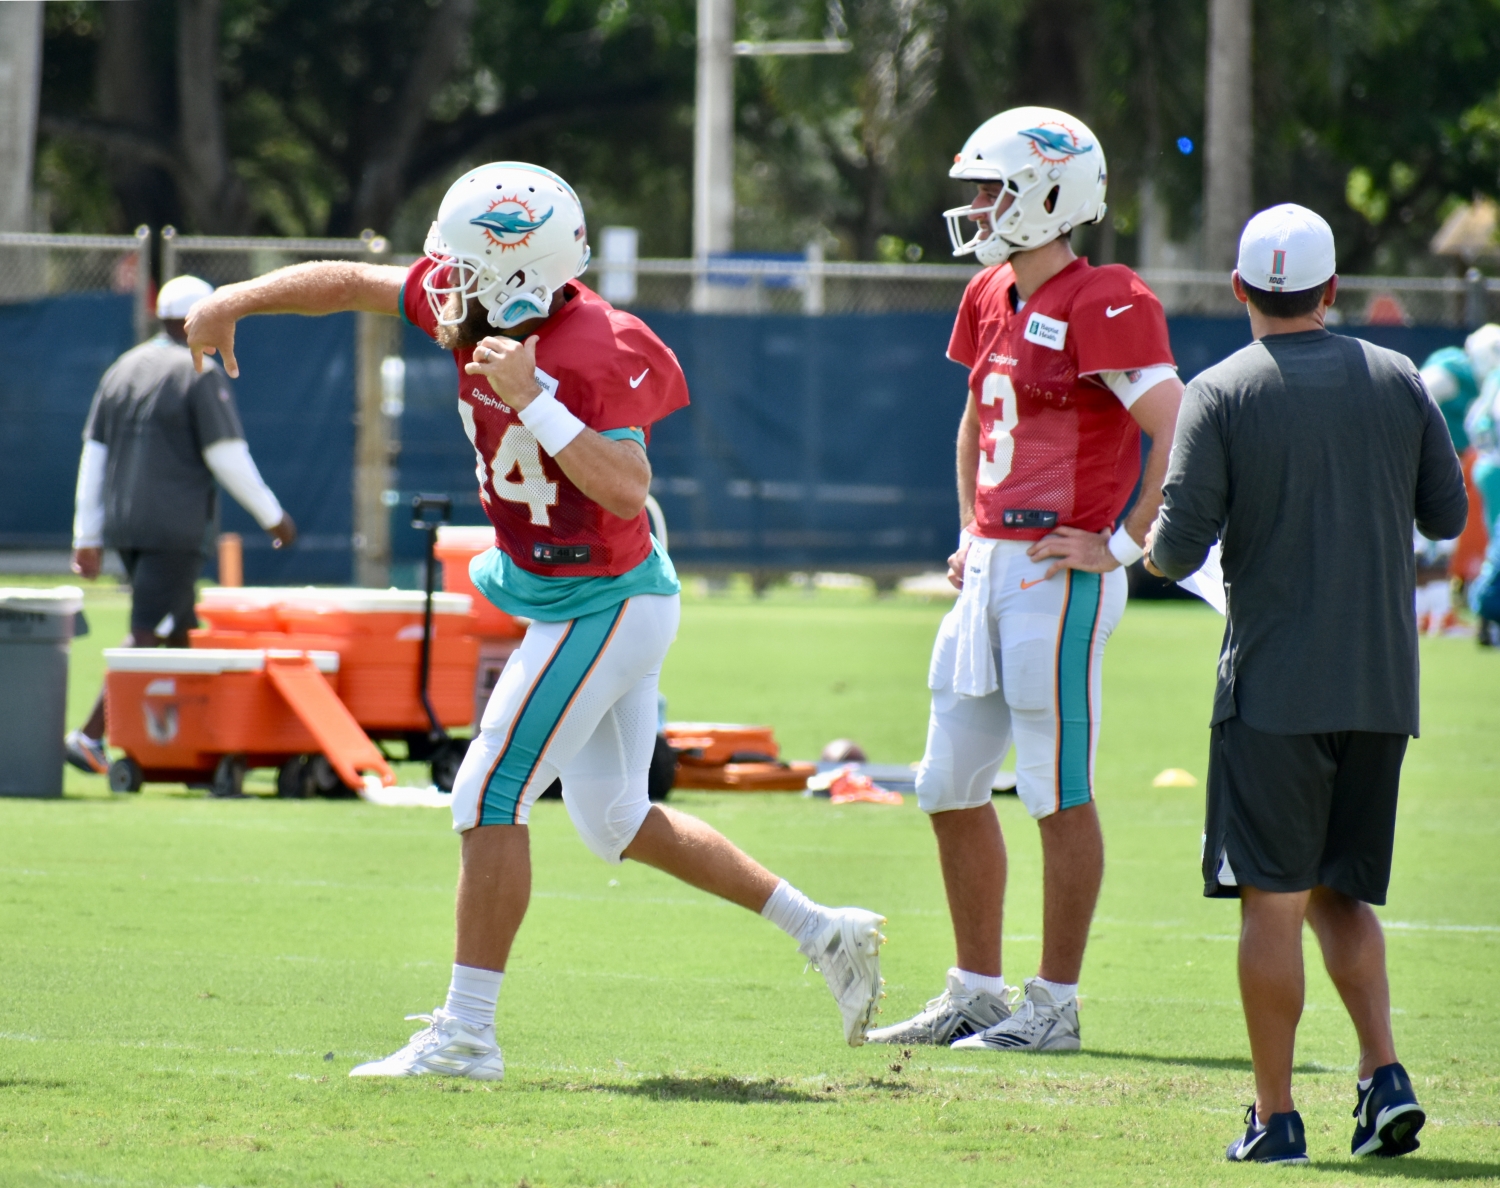 Ryan Fitzpatrick, left, and Josh Rosen are still vying for the starting QB job with the Dolphins. (Photo/Tony Capobianco)